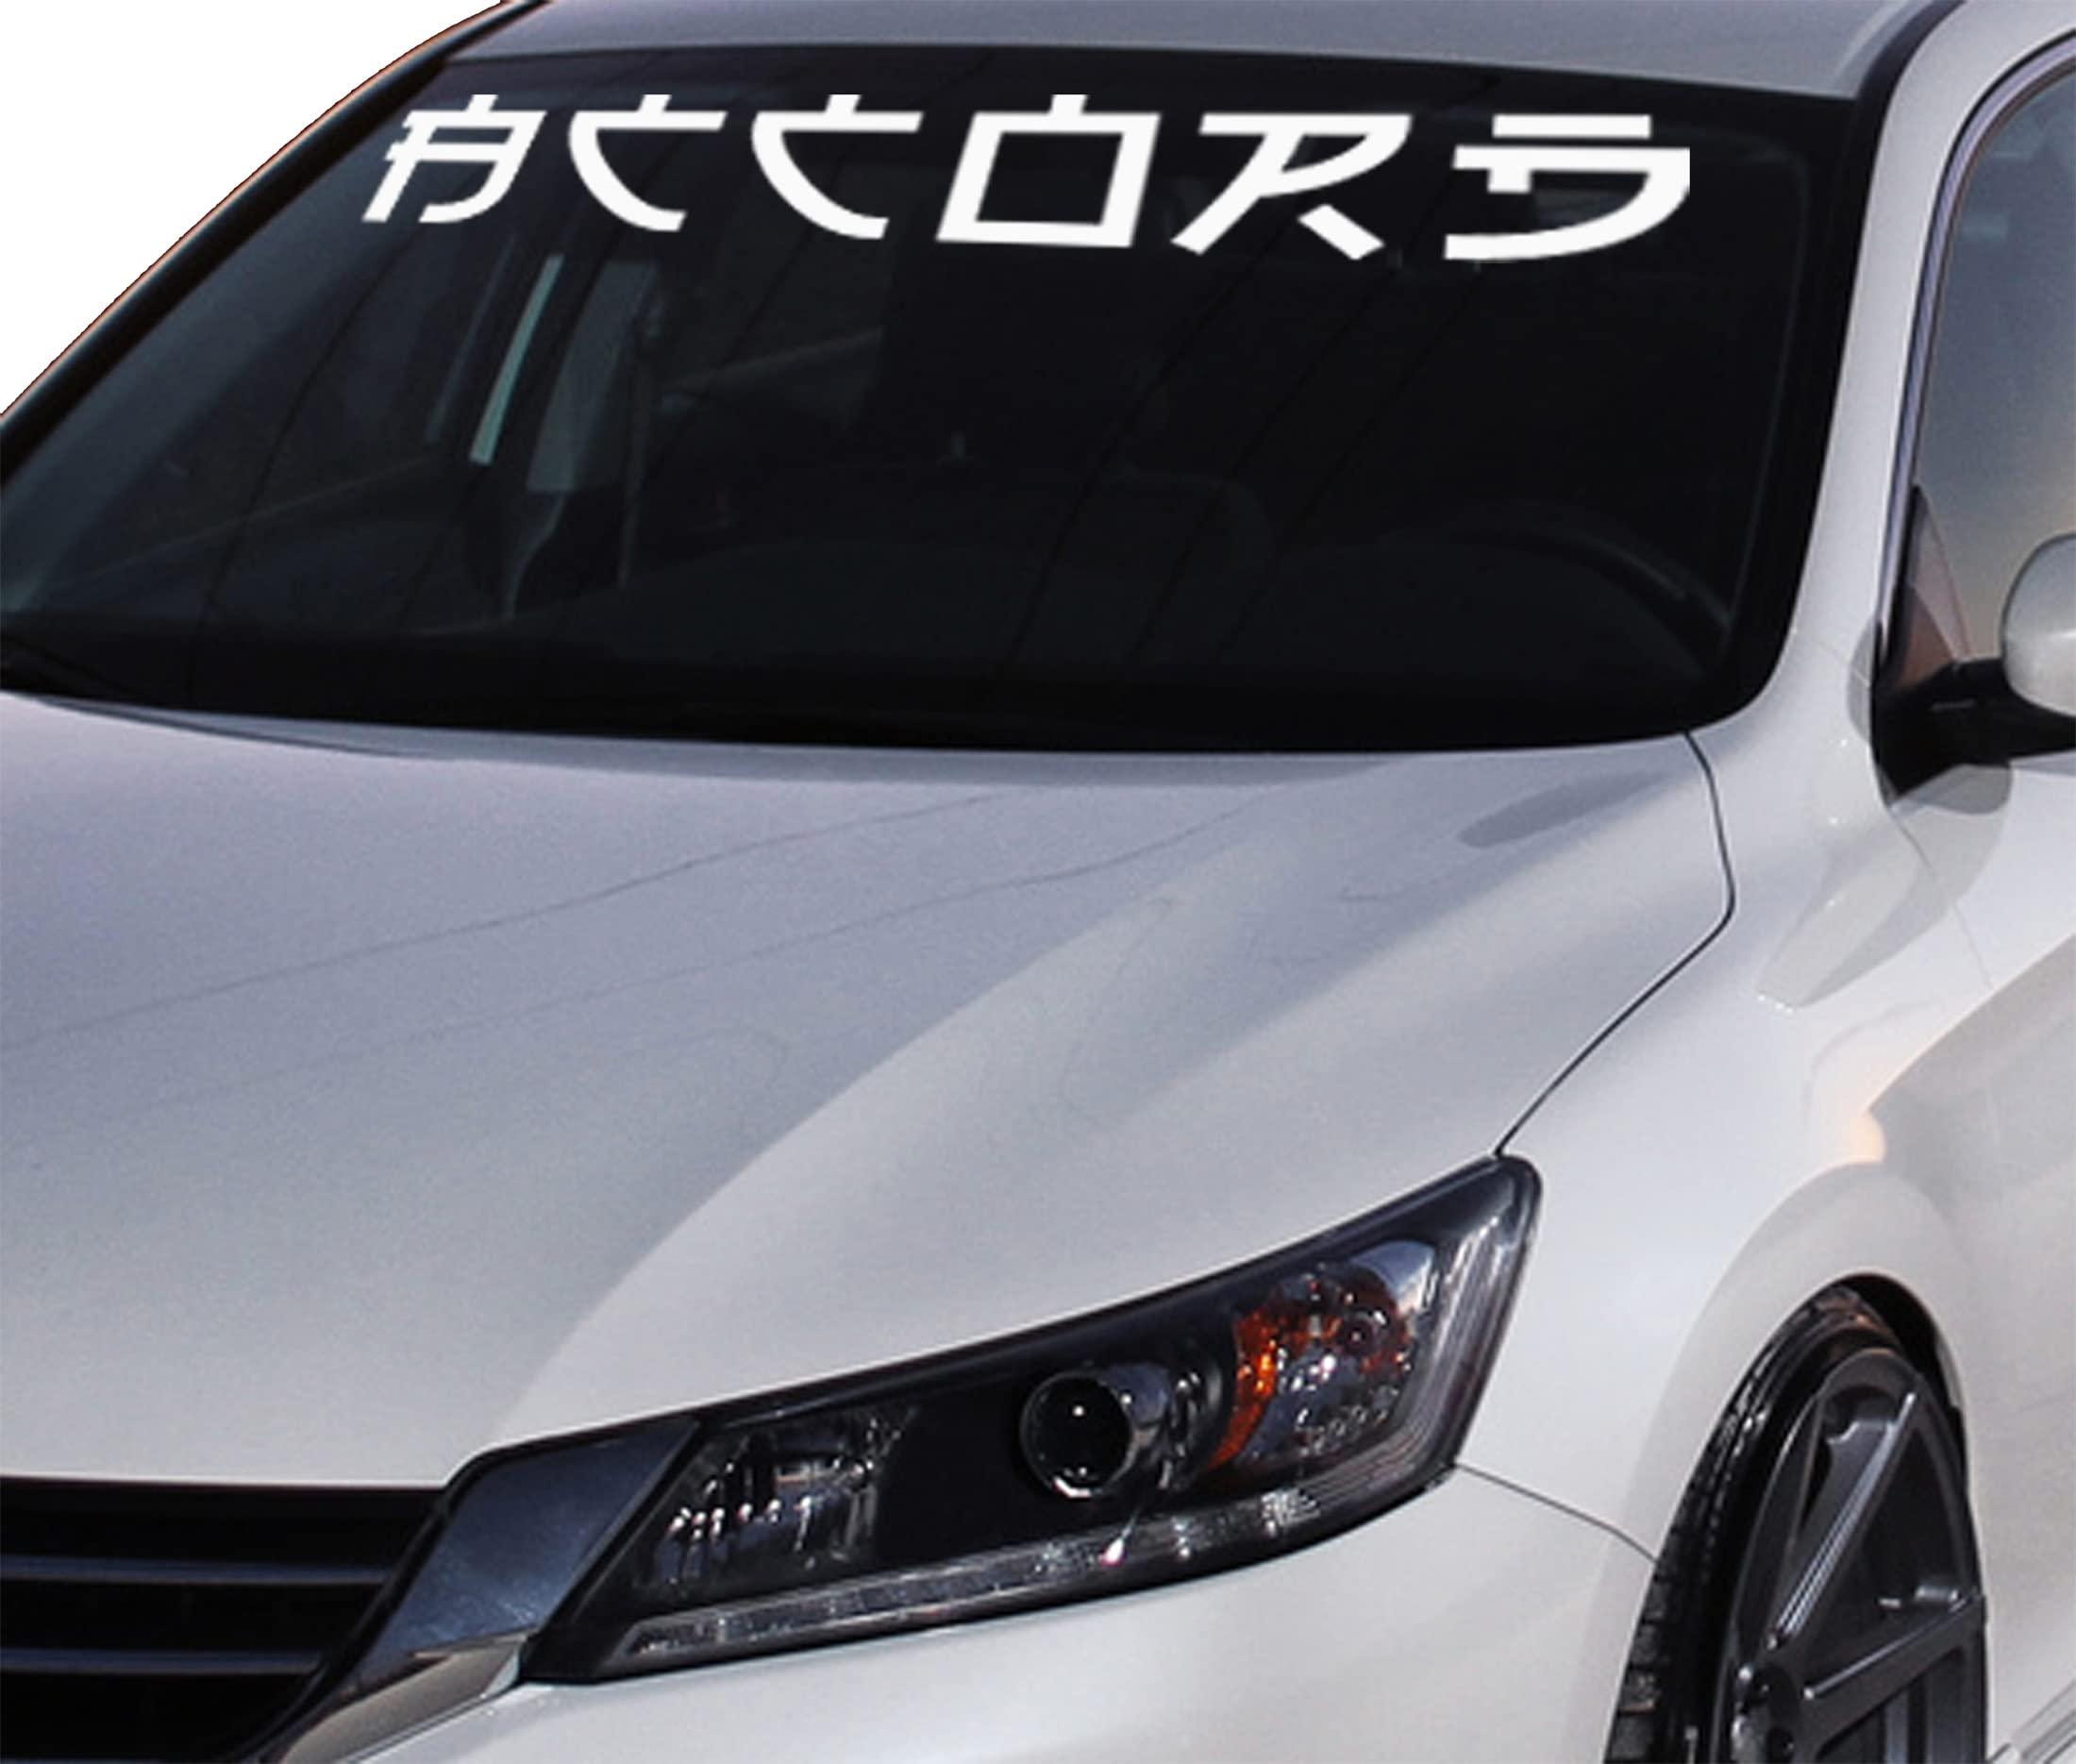 Honda Accord Chinese letter Windshield banner vinyl decals stickers - Brands Distributor